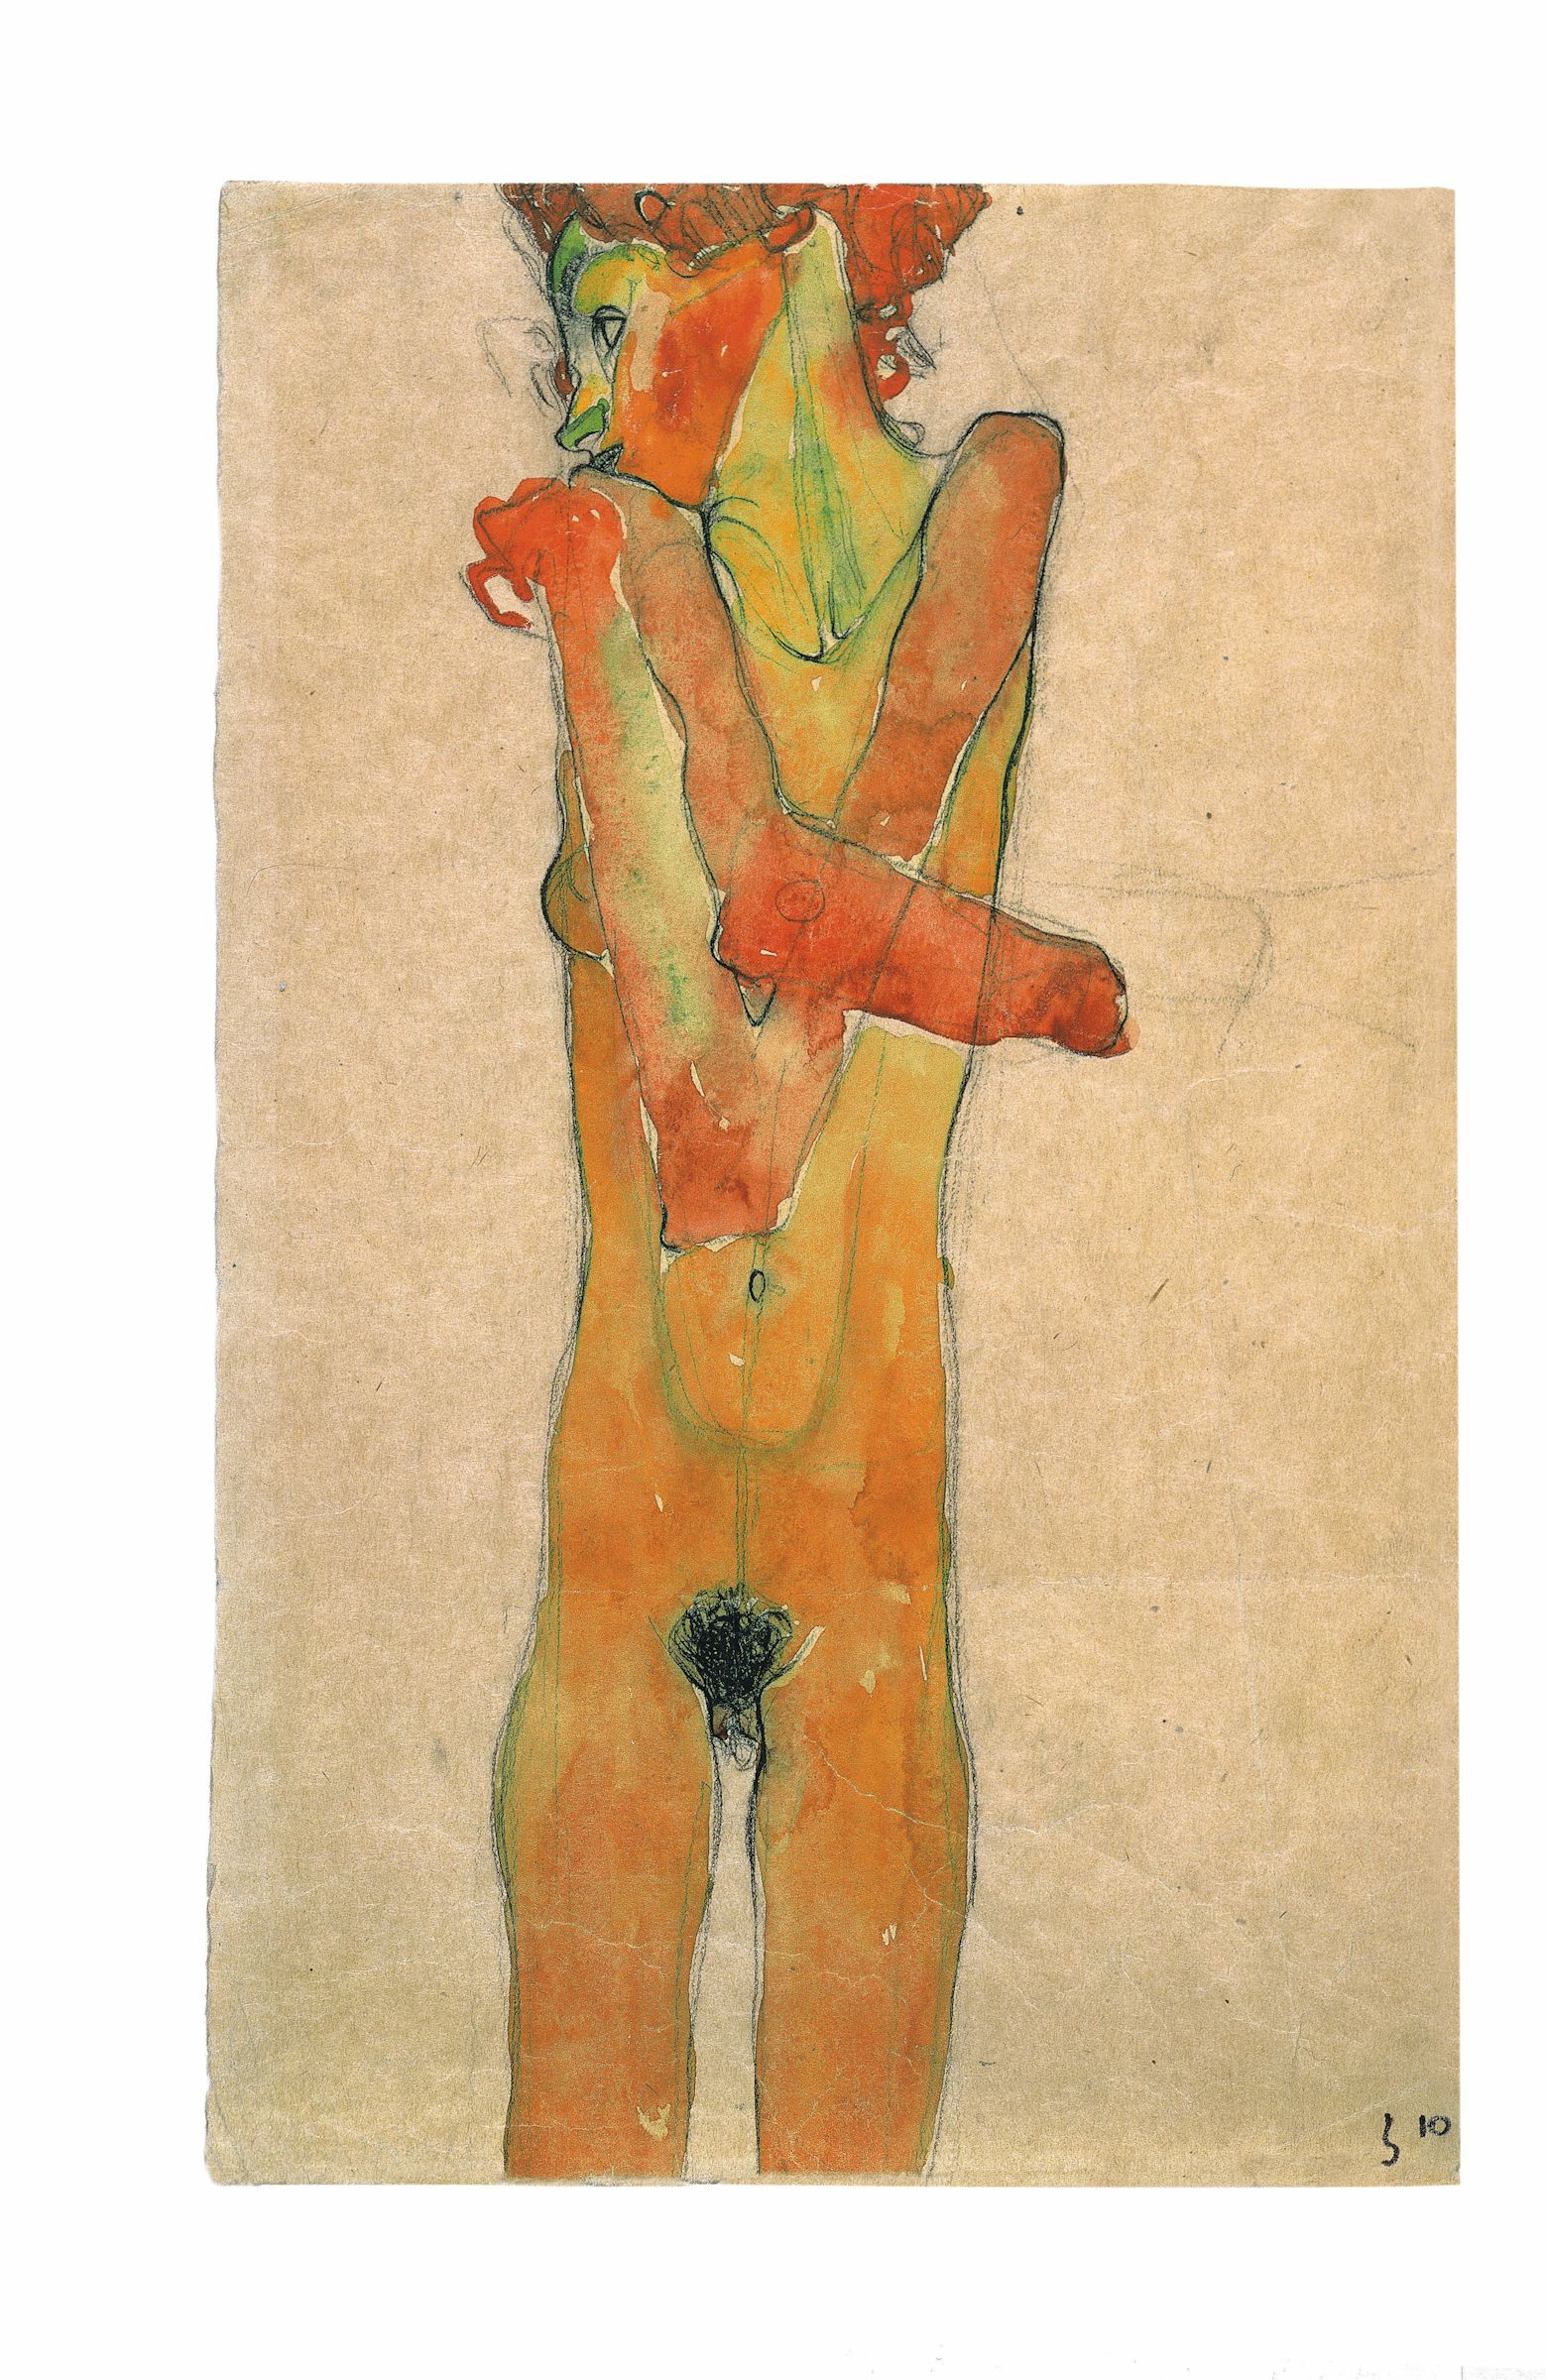 5. Nude Girl with Crossed Arms (Gerti Schiele)